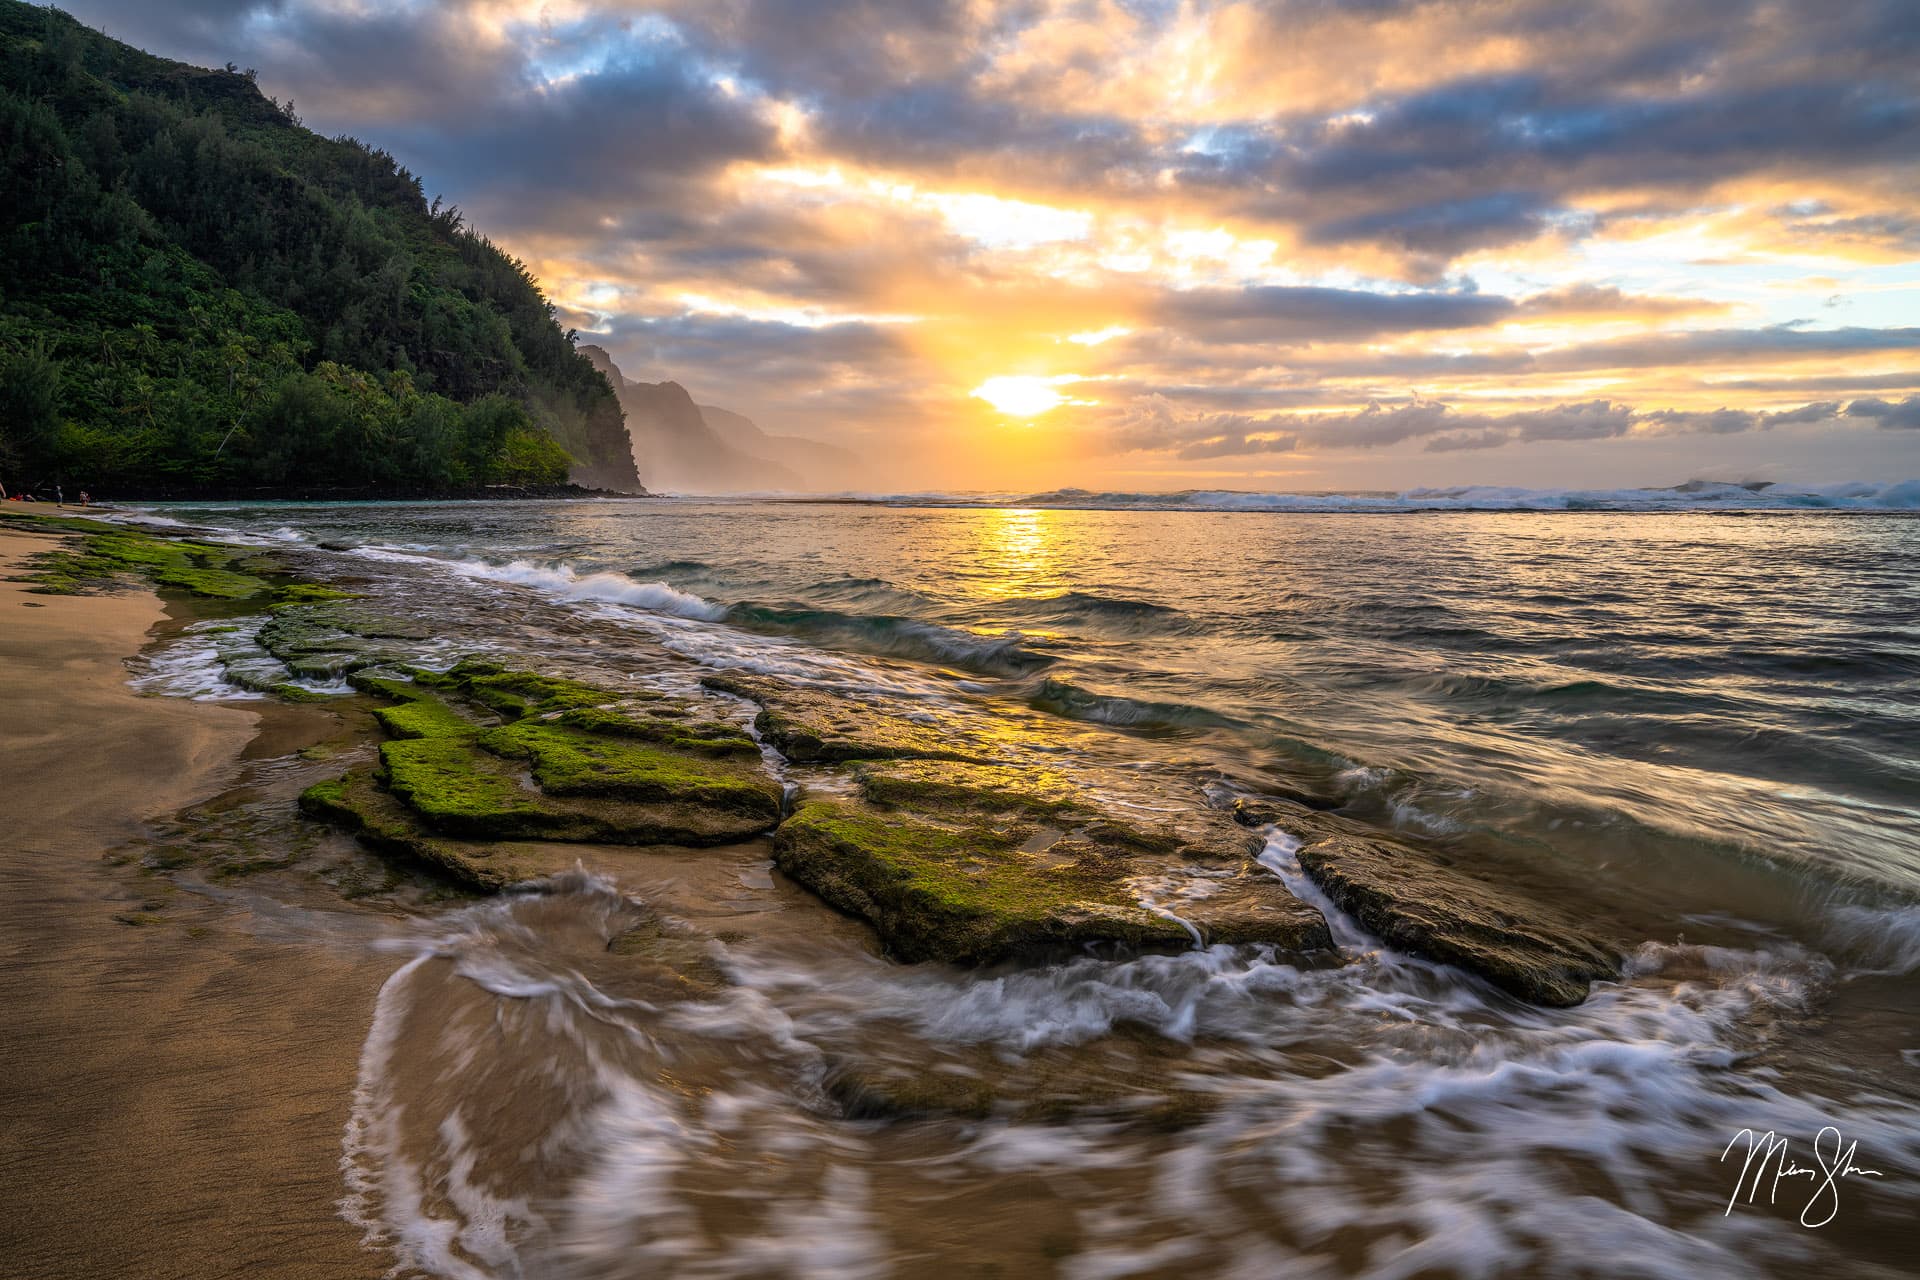 Kauai Photography For Sale - Open and Limited Edition Fine Art Prints and Kauai, Hawaii Nature Photography Galleries